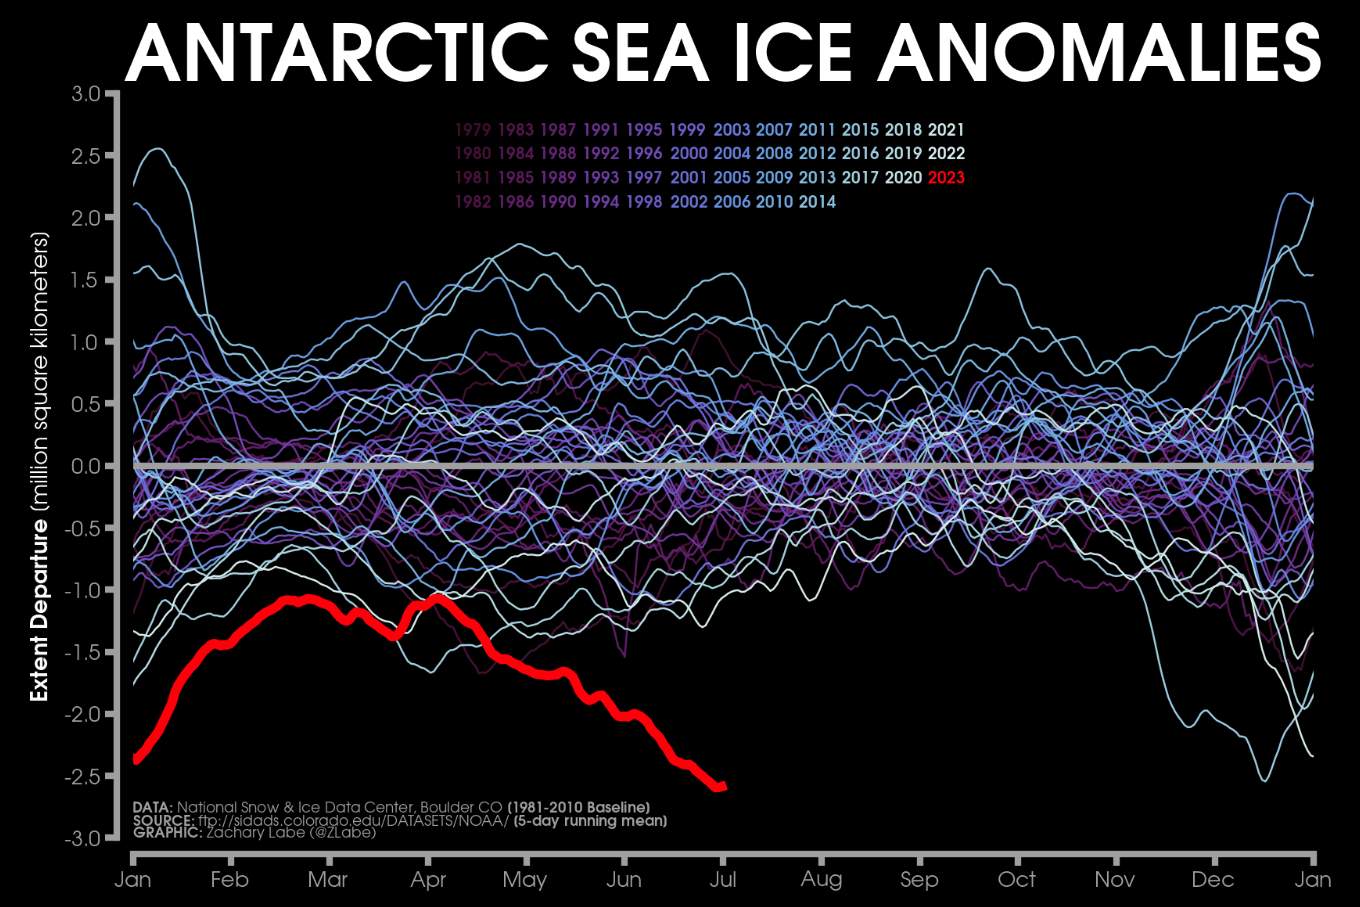 Fig. 2: Anomaly in Antarctic sea ice extent since 1979; Source: zacklabe.com